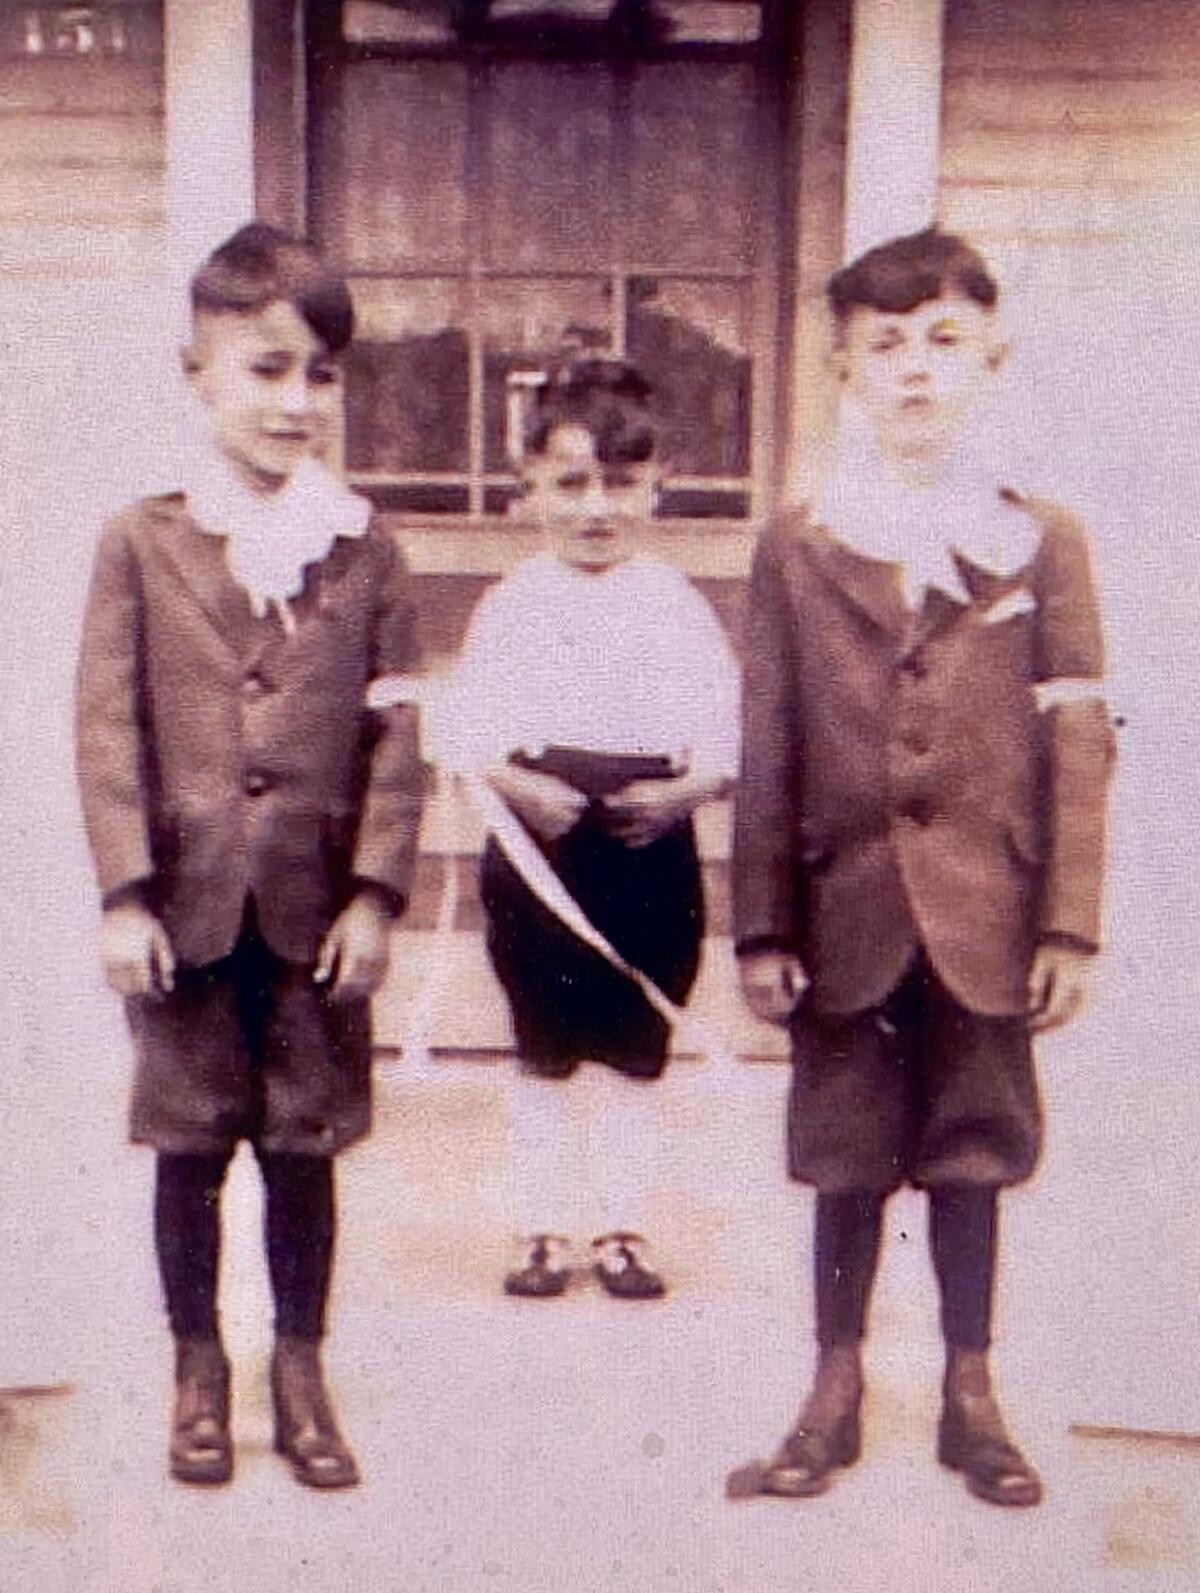 Al Graff (left) with his brother and cousin around 1926.